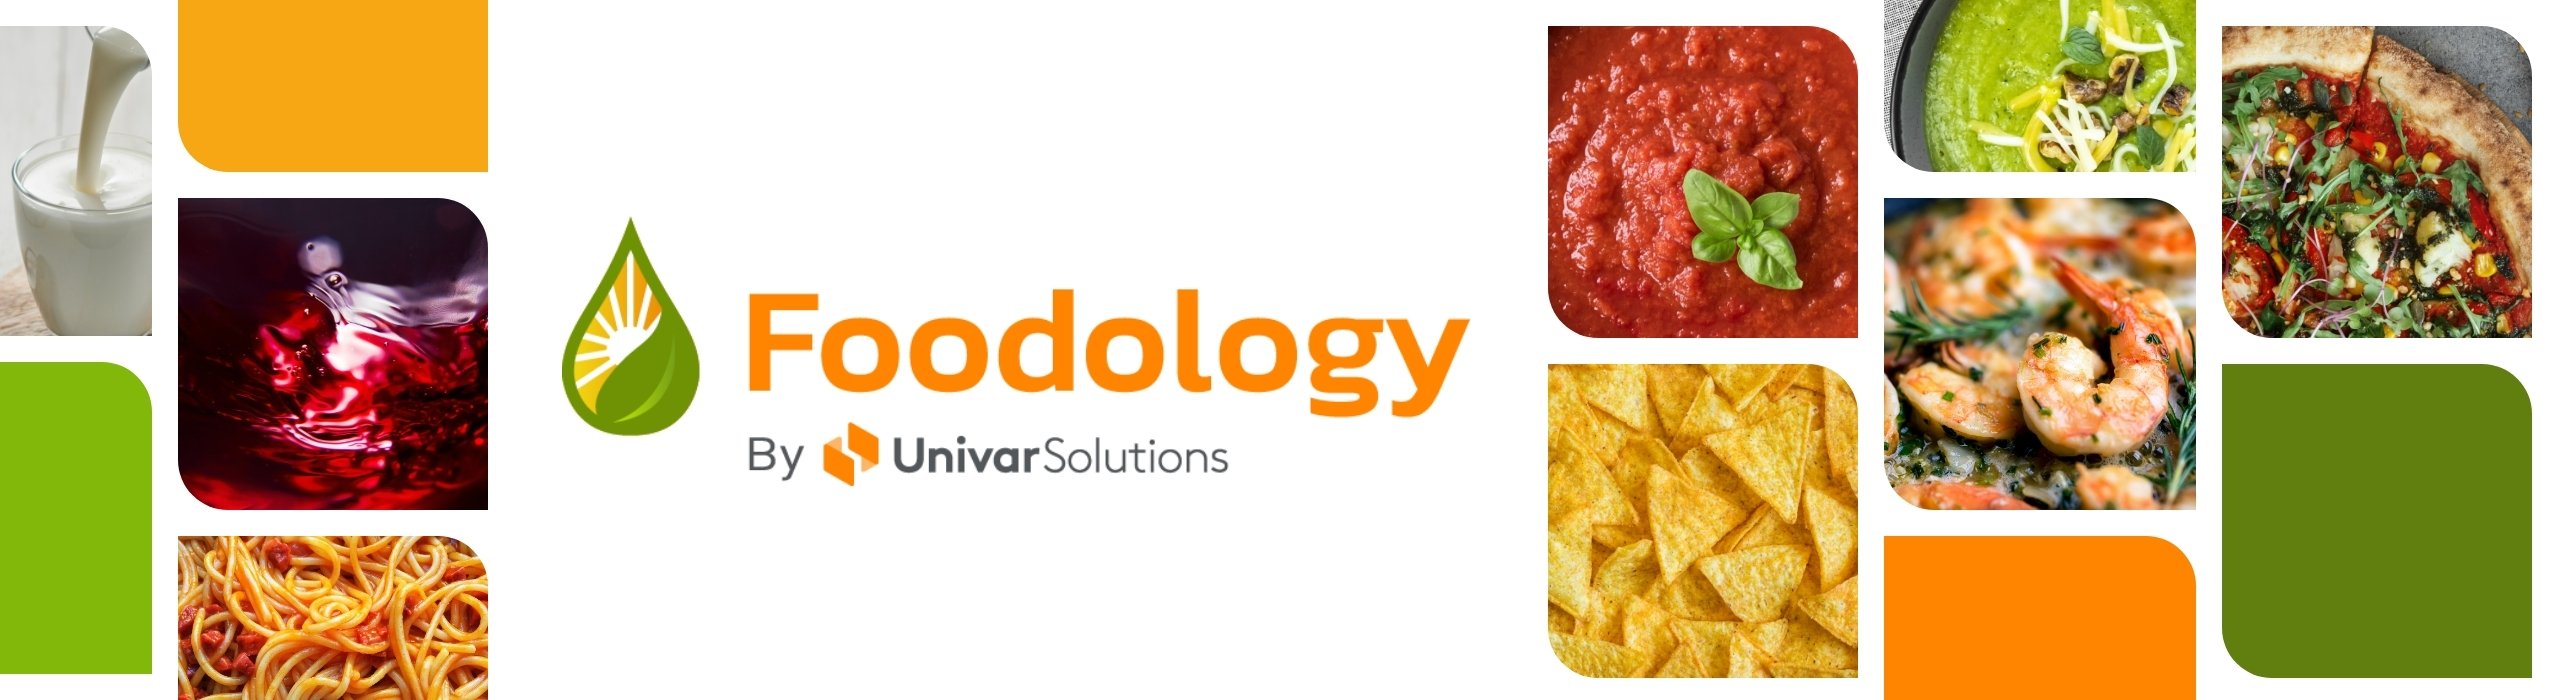 foodology-by-univar-solutions-food-ingredients-innovations